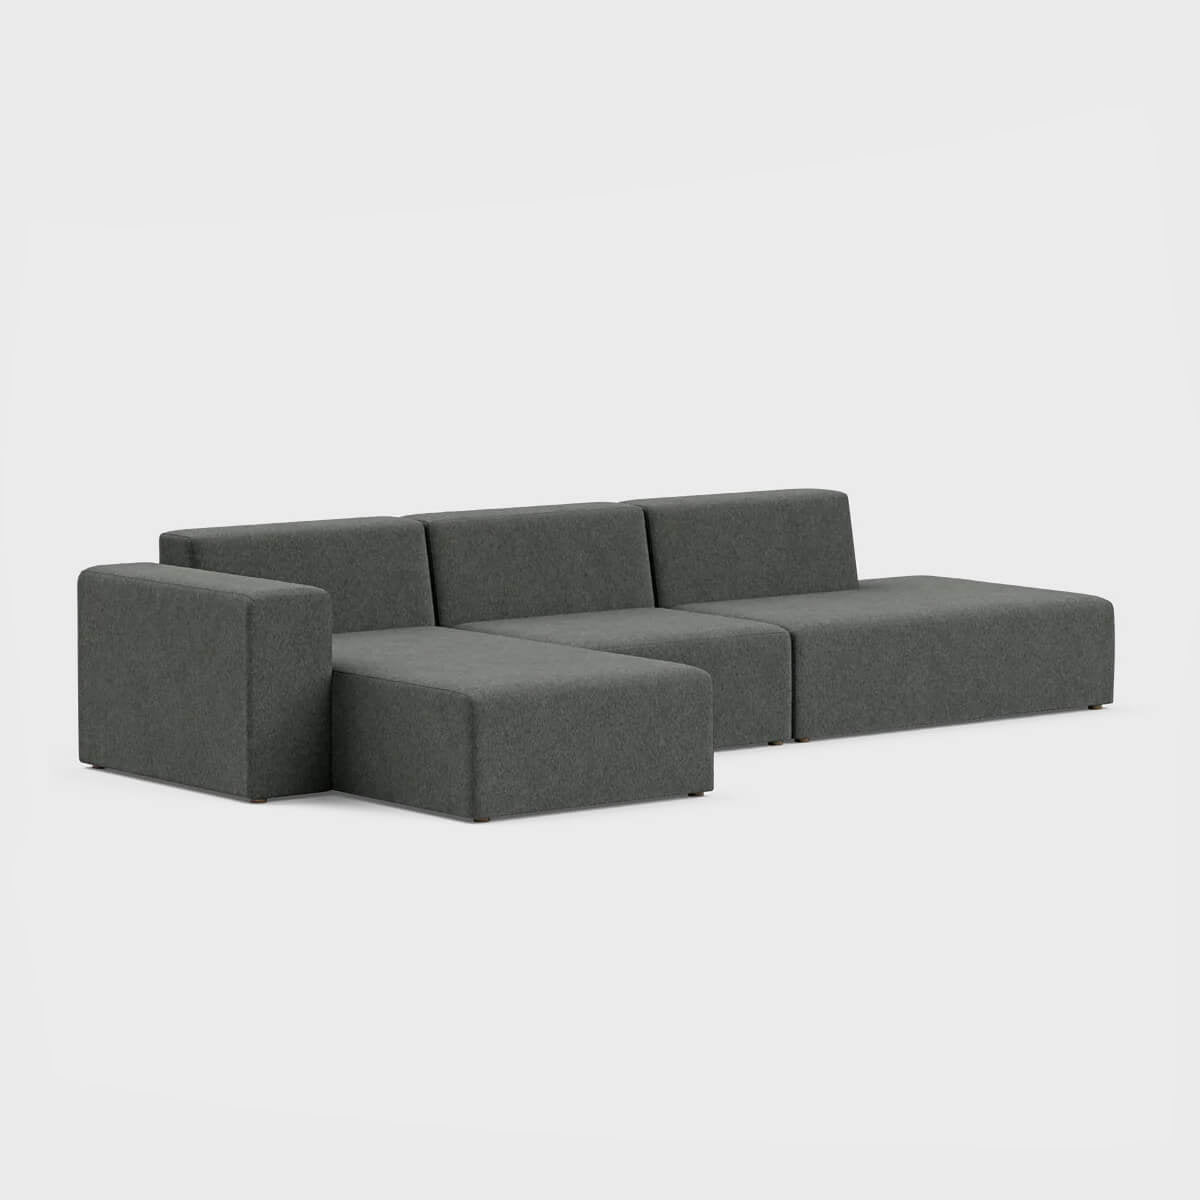 The Floyd Three-Piece Form Sectional